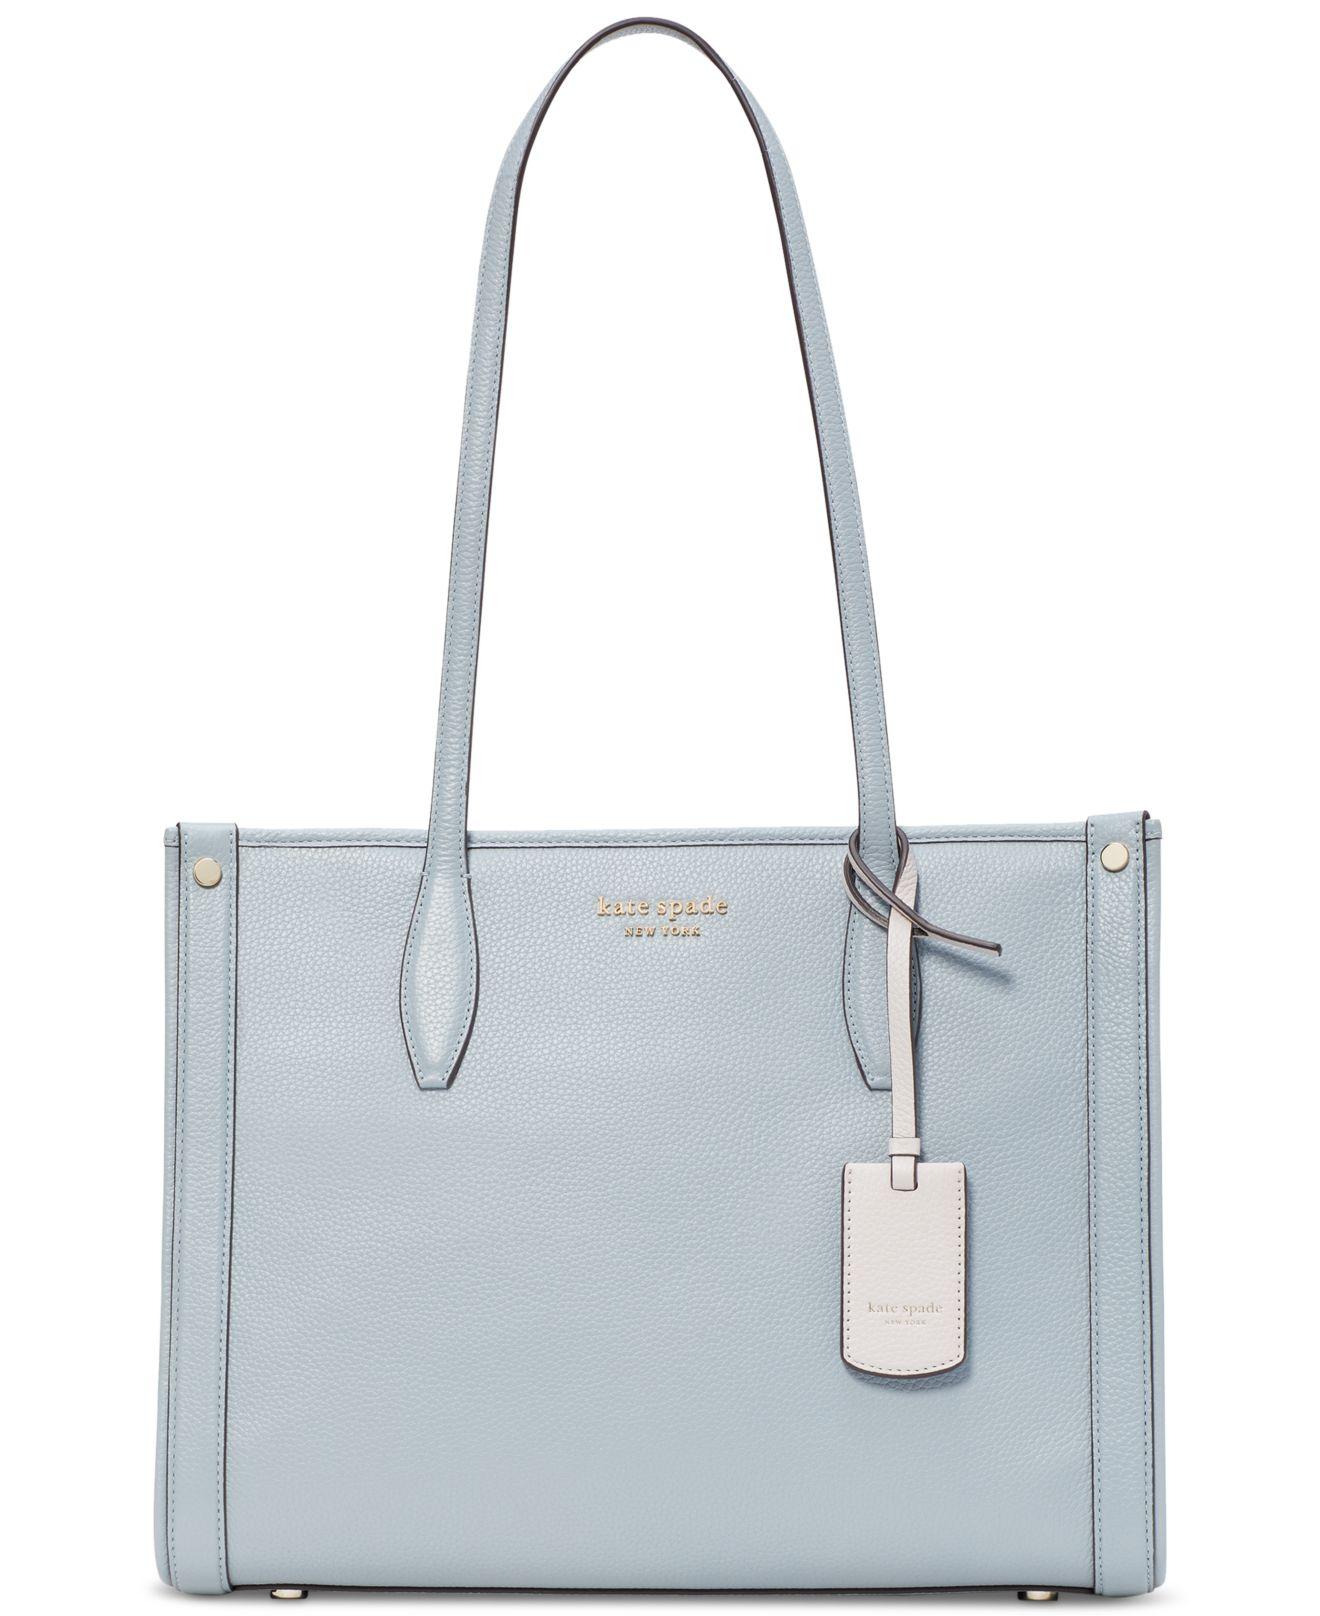 Kate Spade Market Pebbled Leather Tote in Blue | Lyst